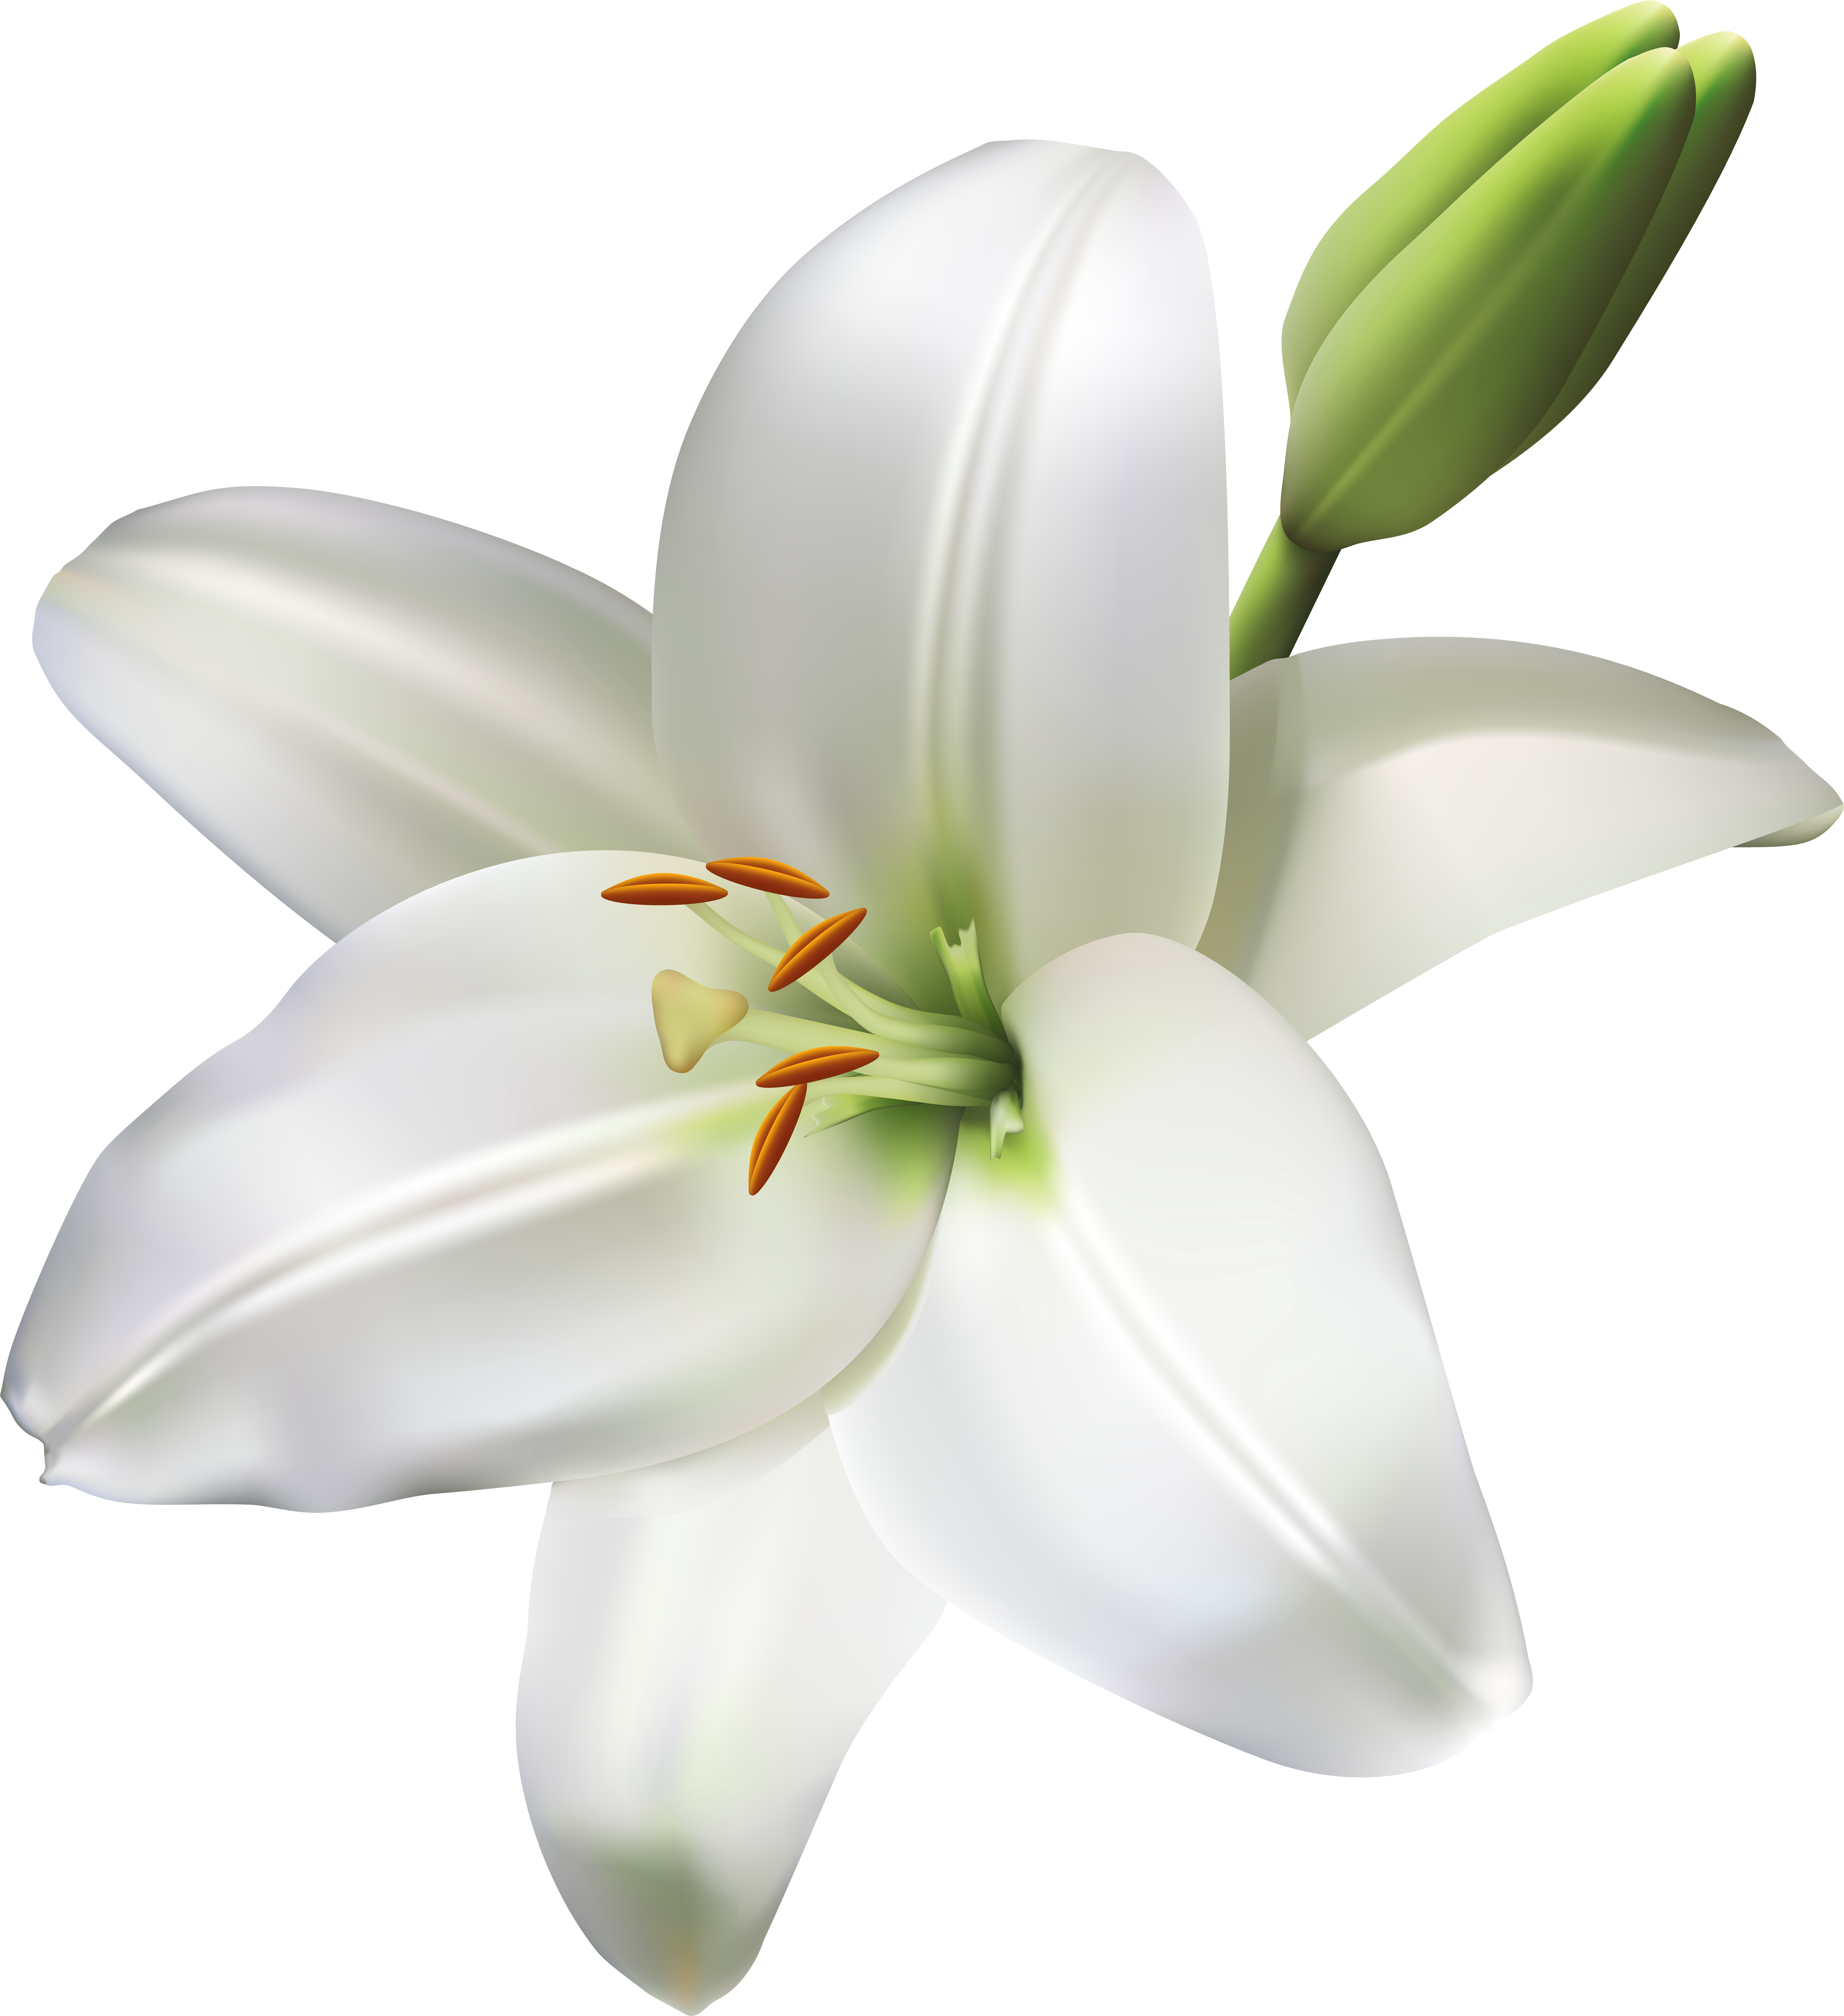 Lily Flower Transparent Png Clip Art Image - Lily Flowers Clear Background ...